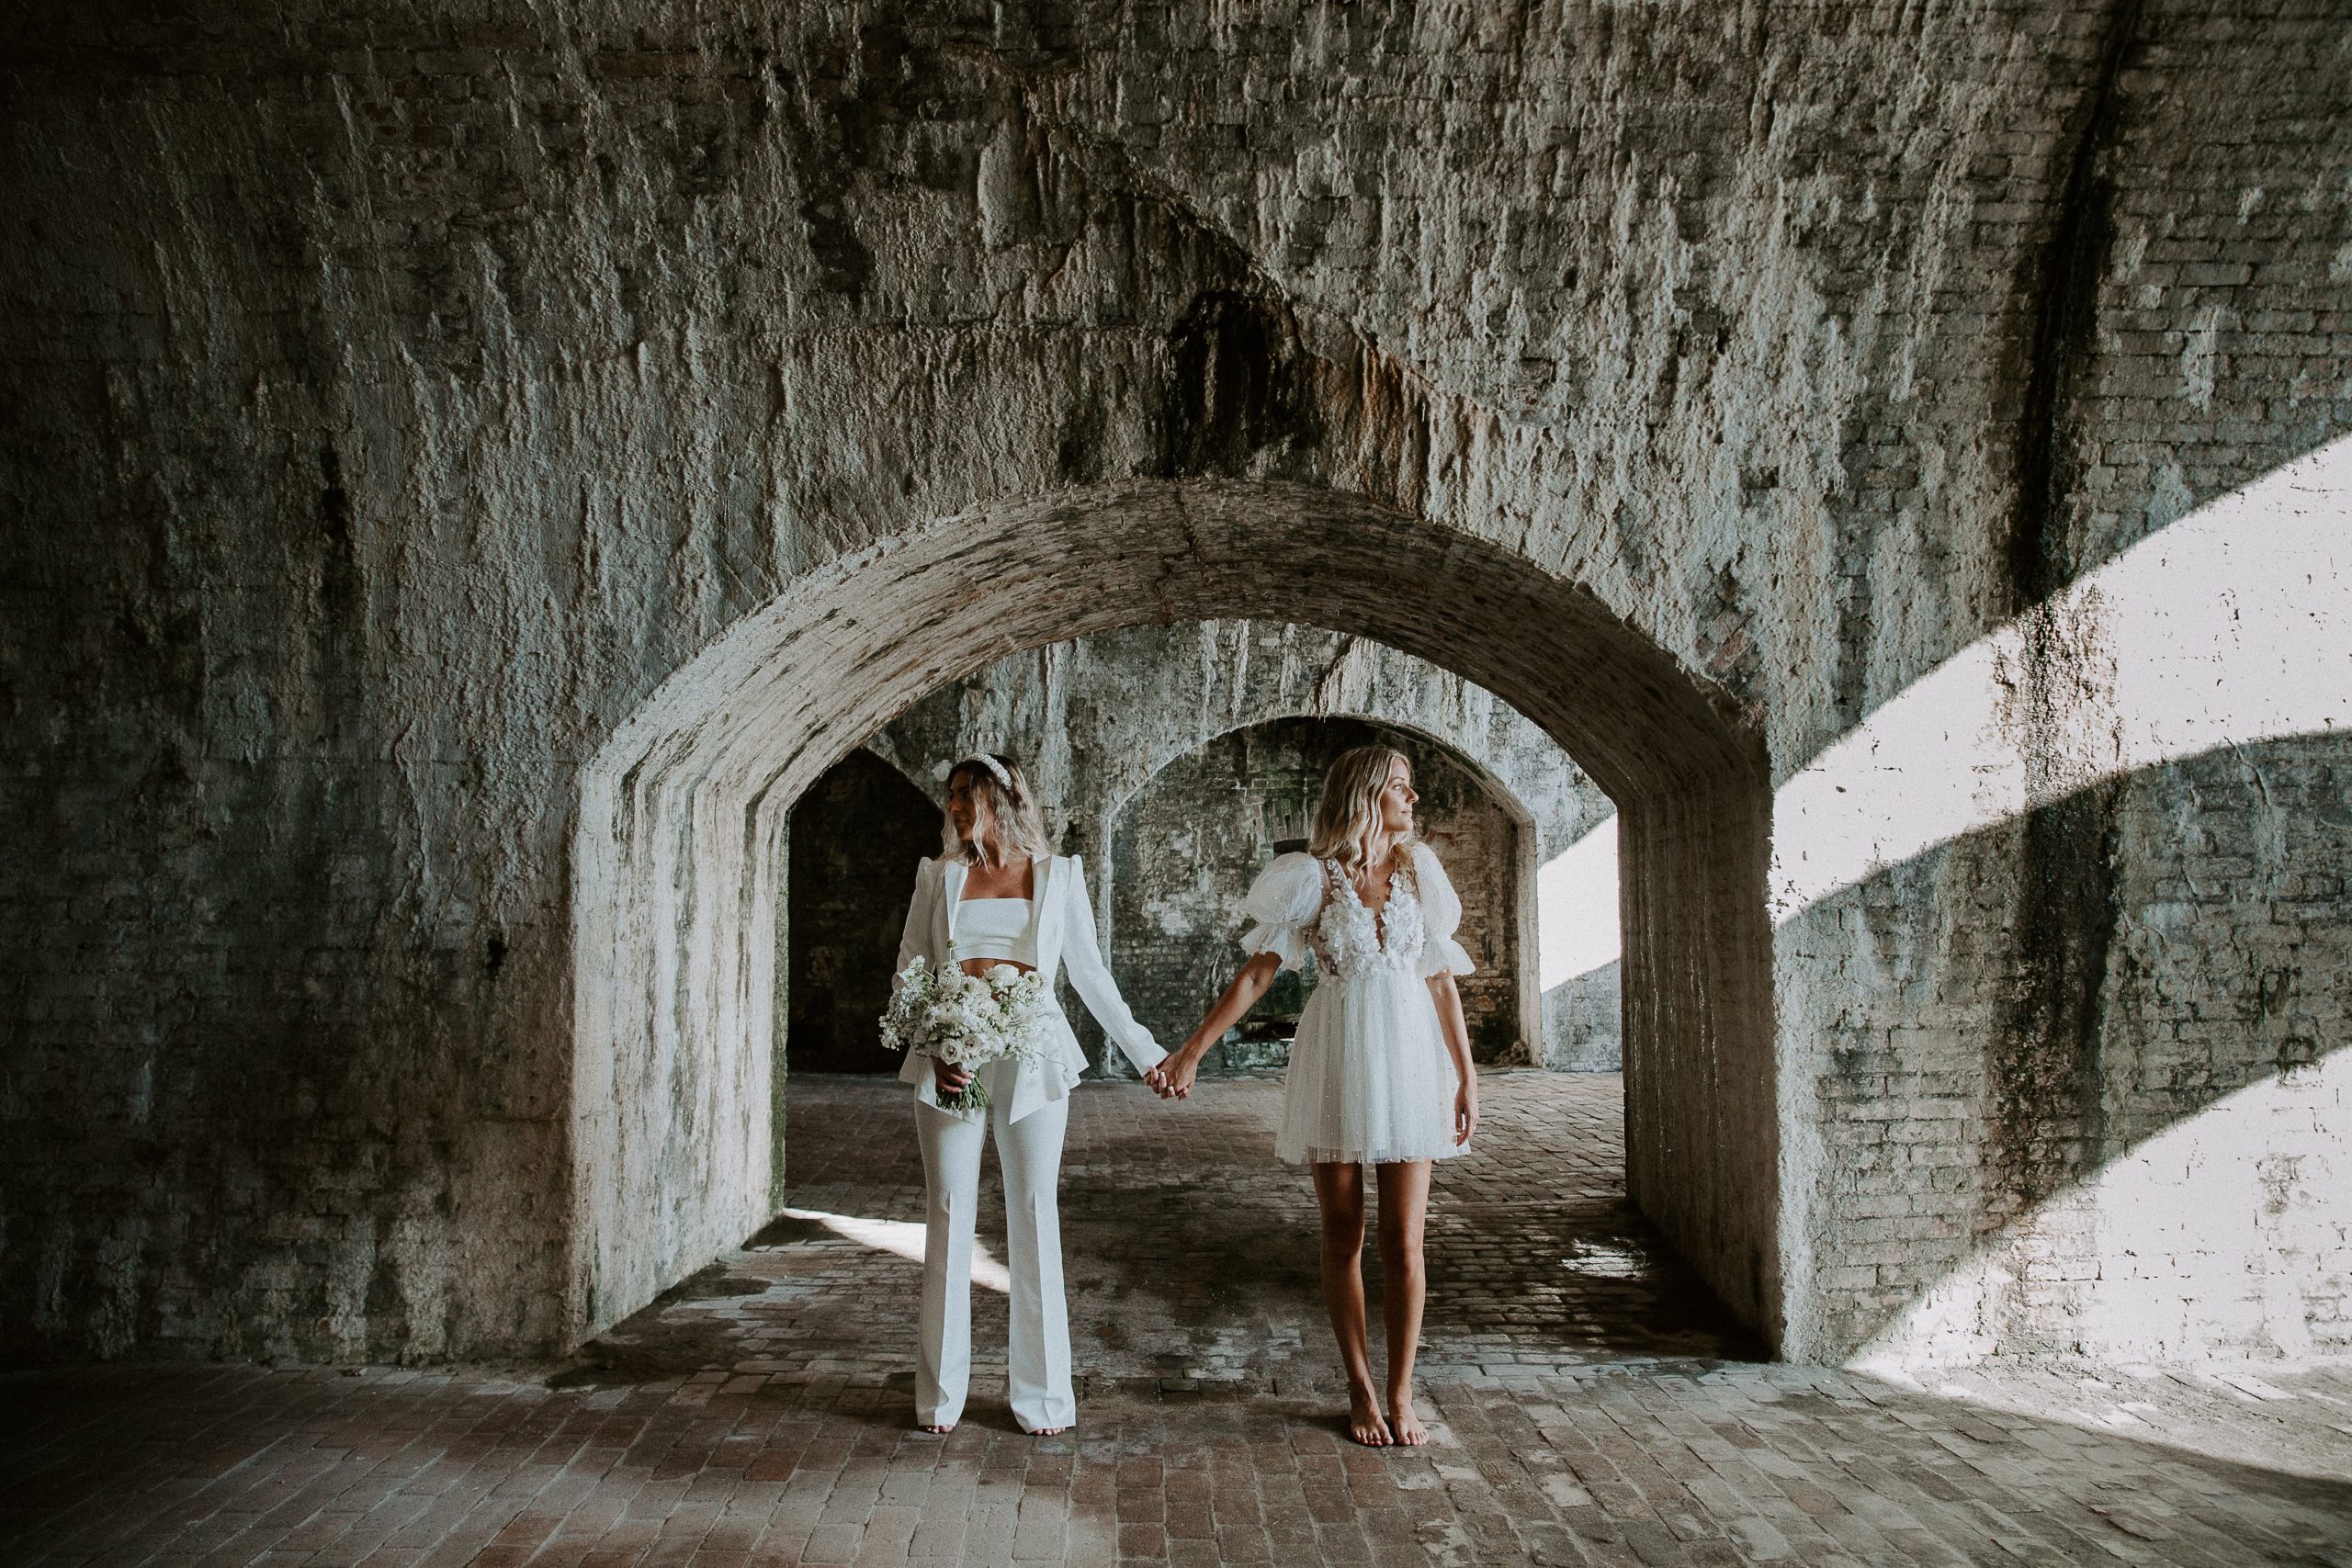 Couple standing hand-in-hand looking opposite directions of each other both in wedding attire standing under an arch in Fort Pickens during their Florida elopement